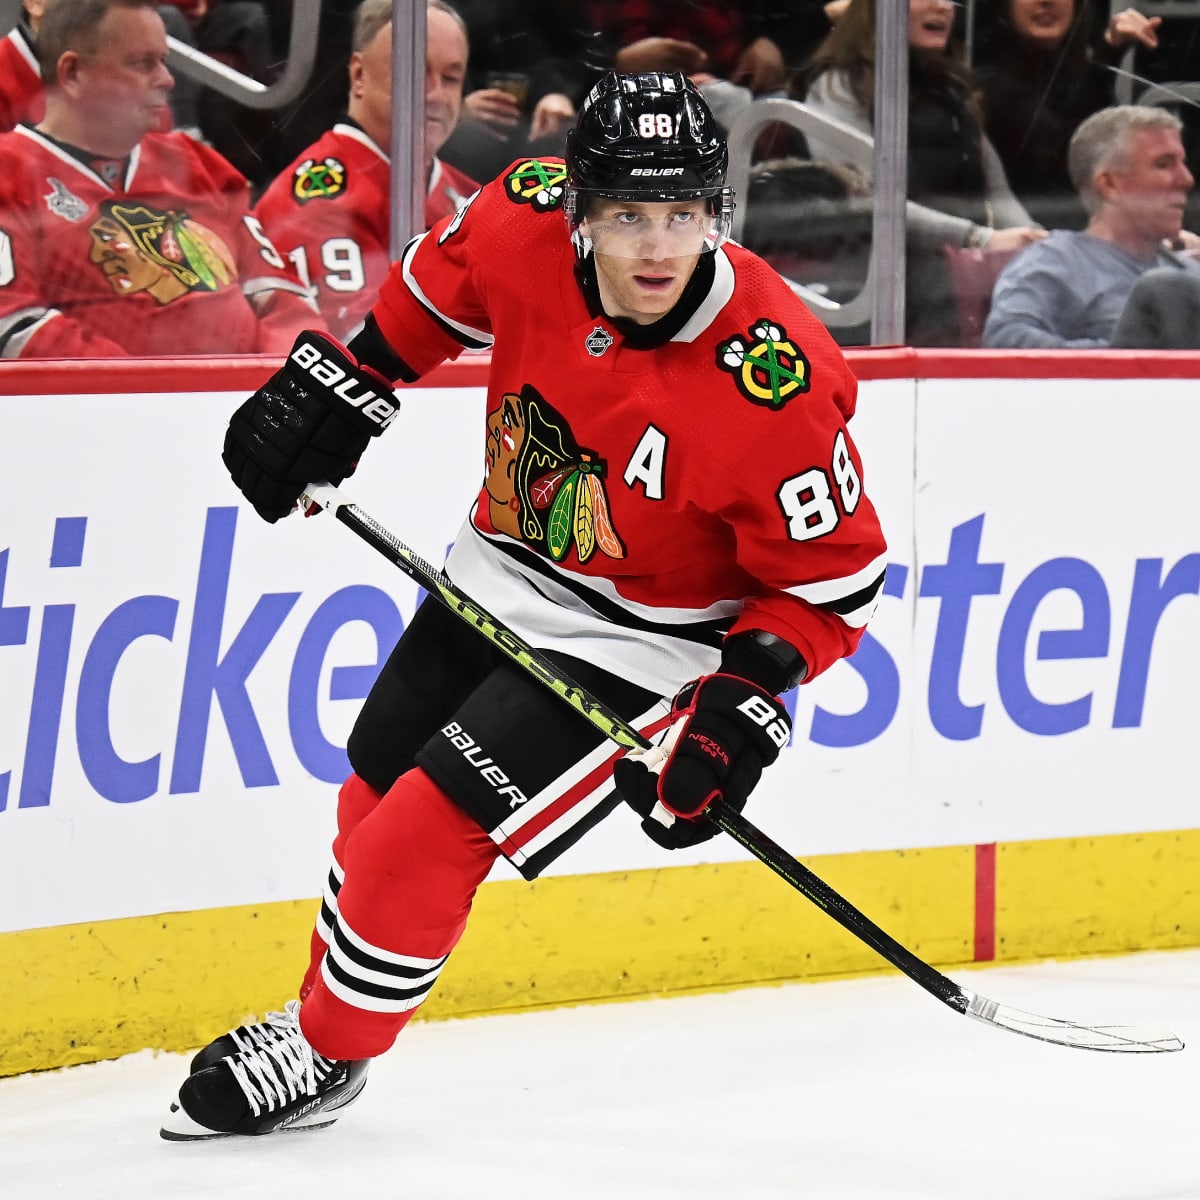 Patrick Kane waives no-move clause to join Rangers, eyes 4th